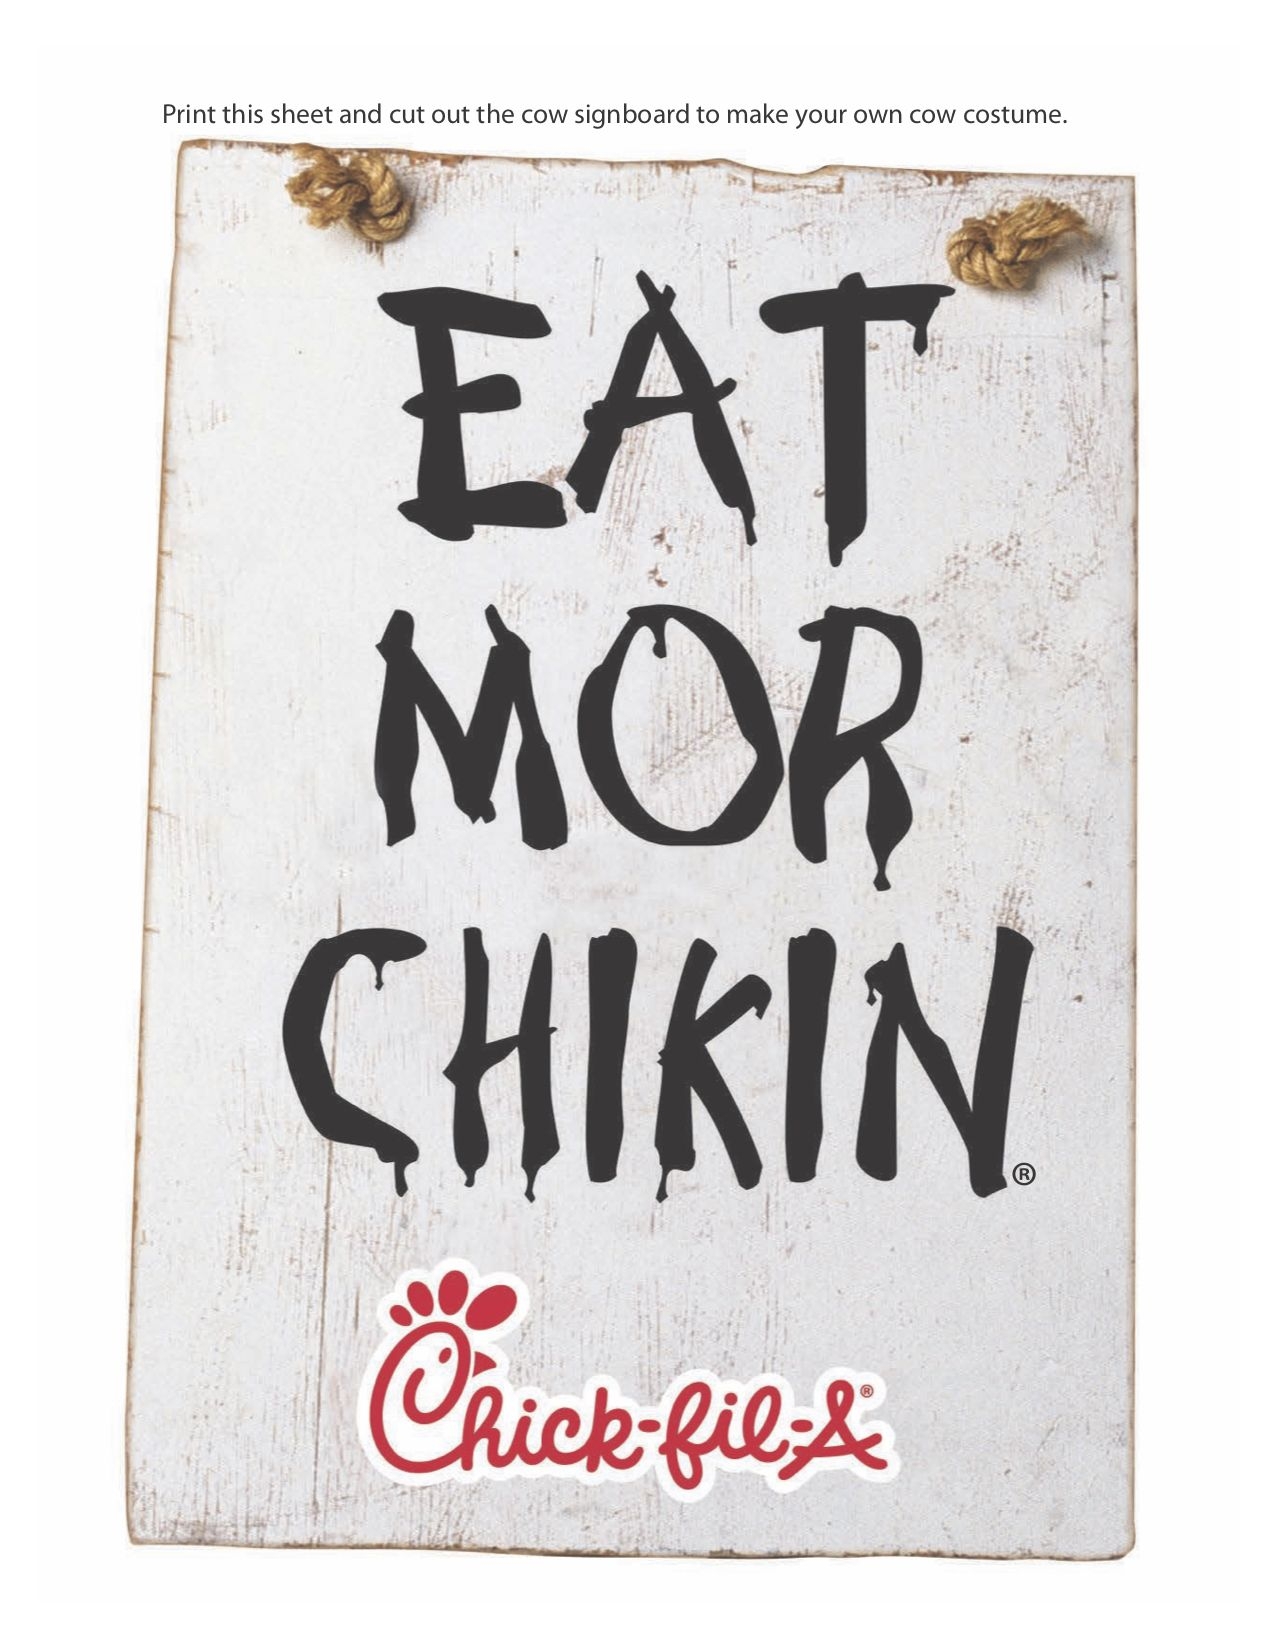 Chick Fil A Cow Starter Kit Costume EAT MOR CHIKIN Cow Appreciation Day Cow Costume Chick Fil A